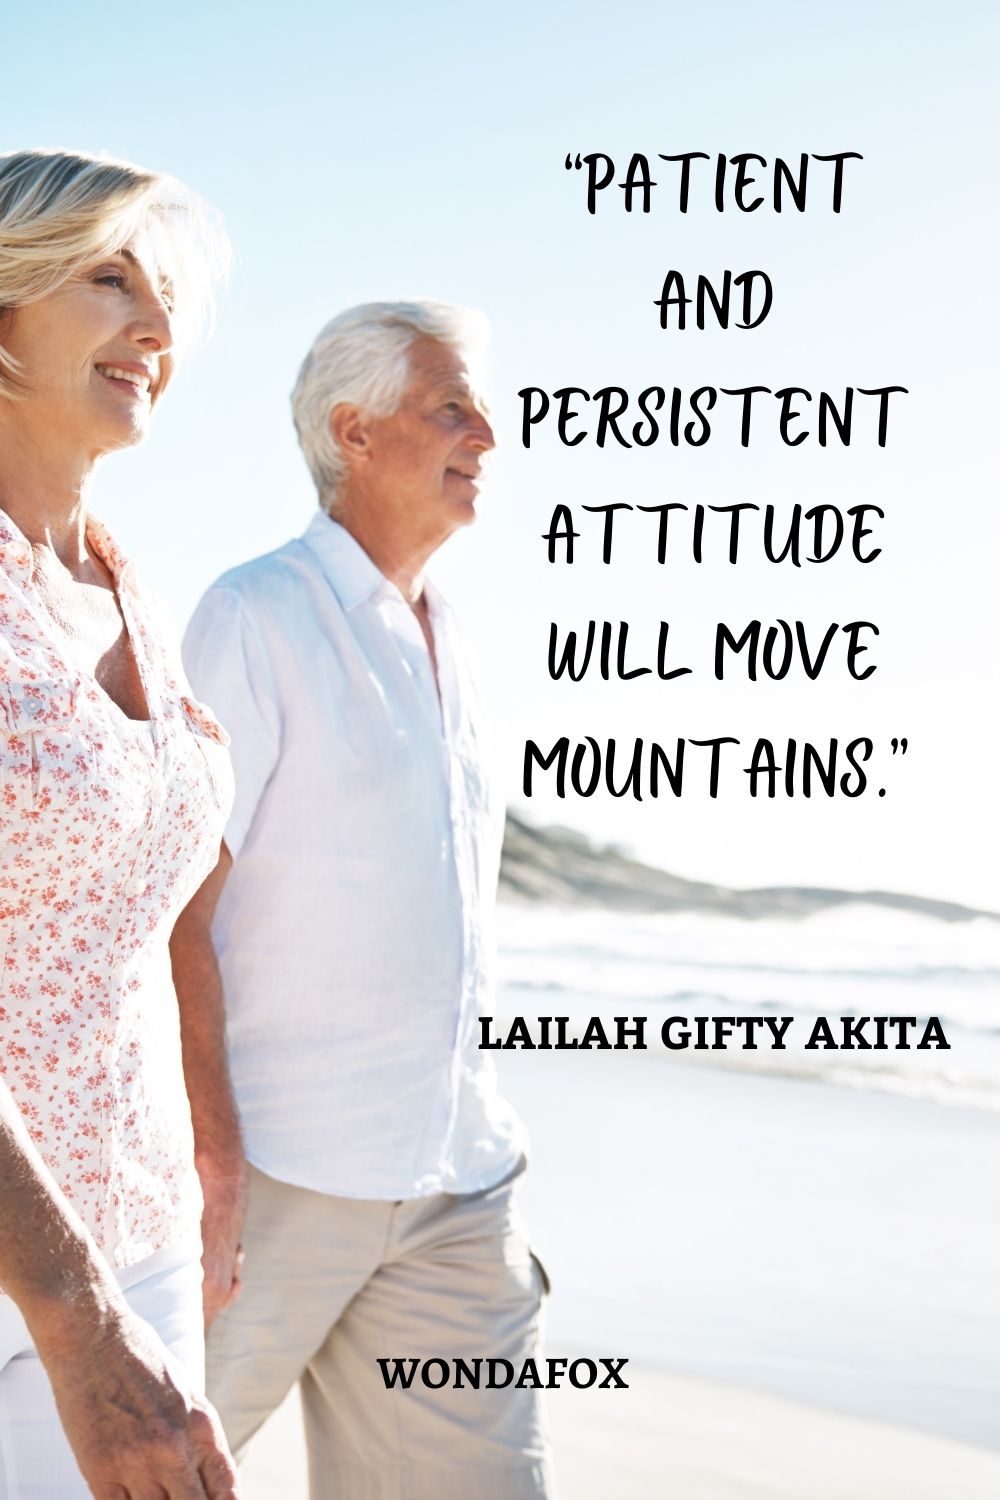 “Patient and persistent attitude will move mountains.”
Lailah Gifty Akita